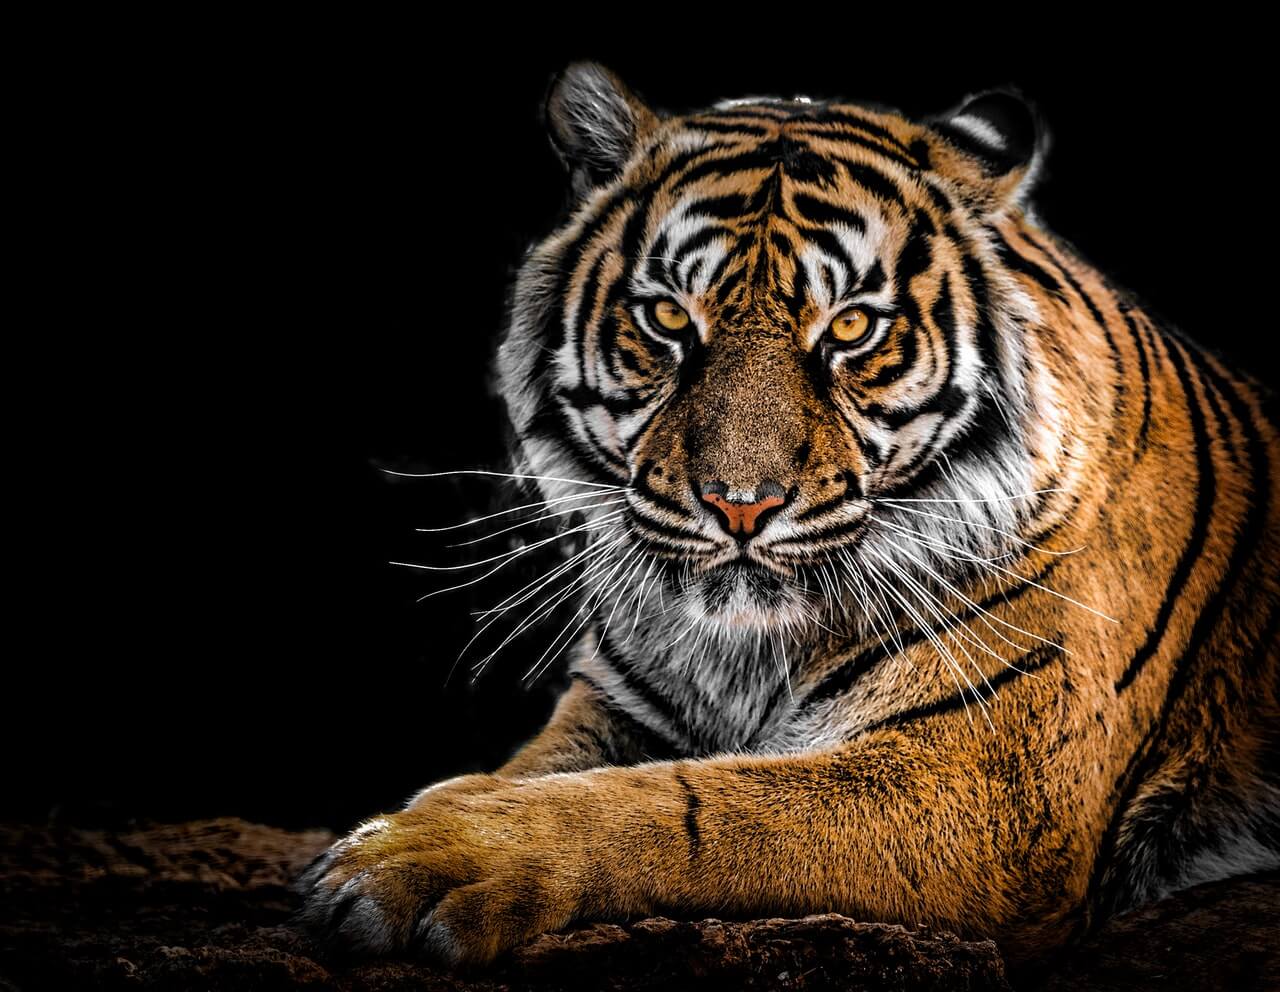 This is a tiger!